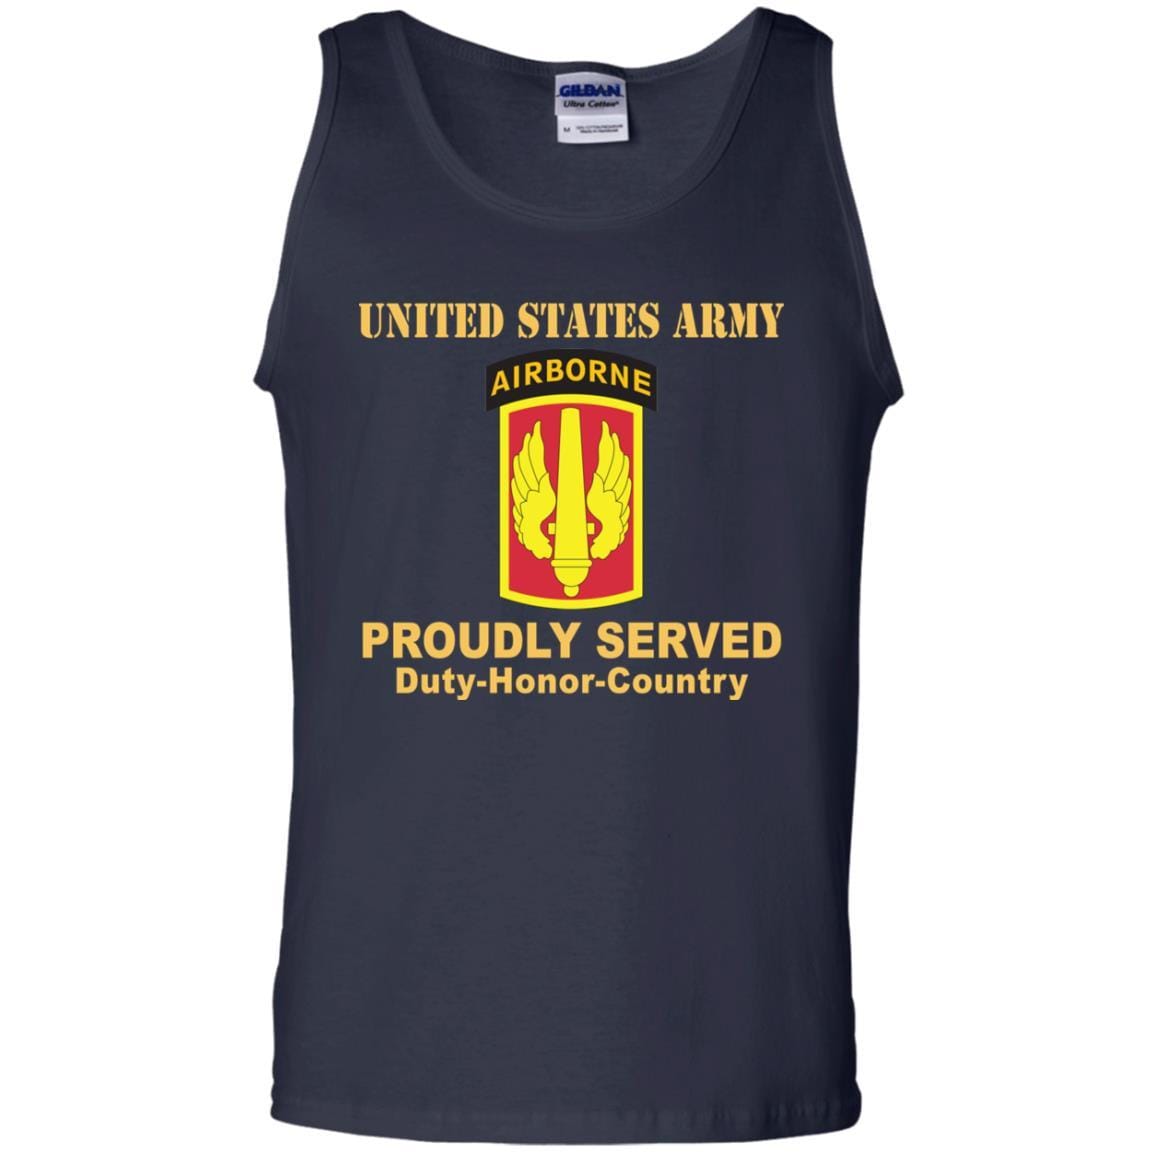 US ARMY 18TH FIELD ARTILLERY WITH AIRBORNE TAB- Proudly Served T-Shirt On Front For Men-TShirt-Army-Veterans Nation